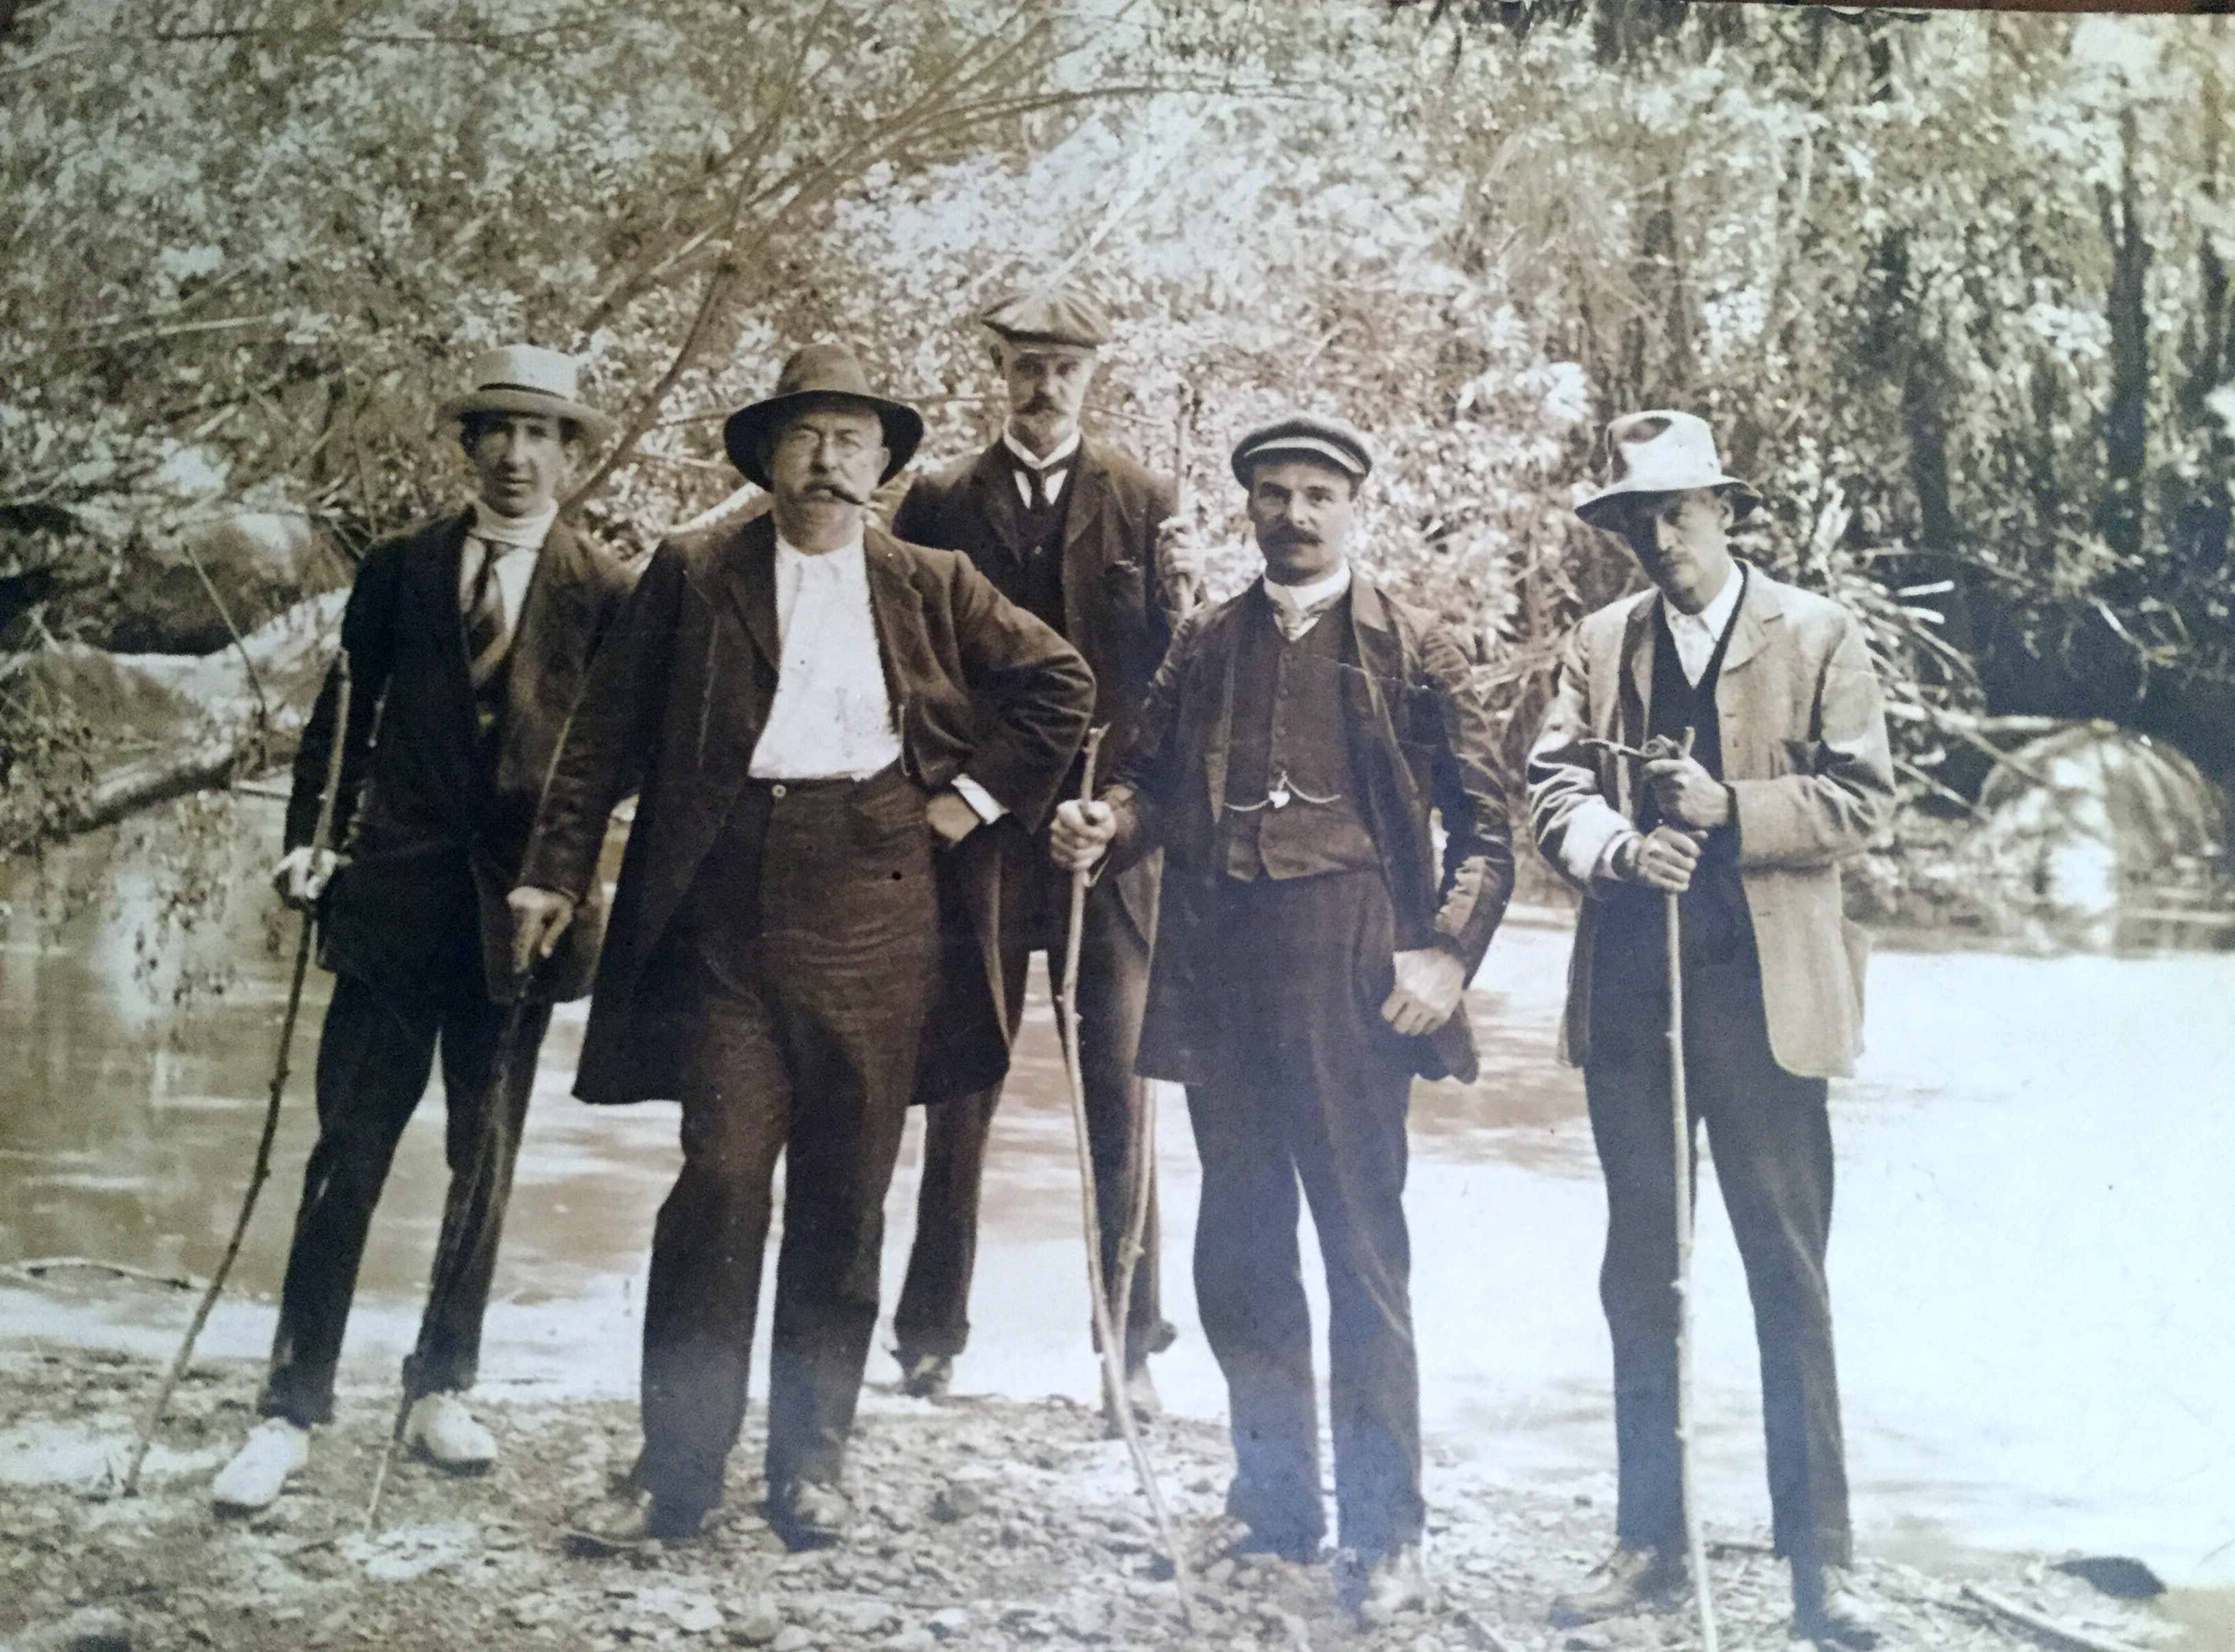 Bushwalking 1905 style- comp,tee with cigar